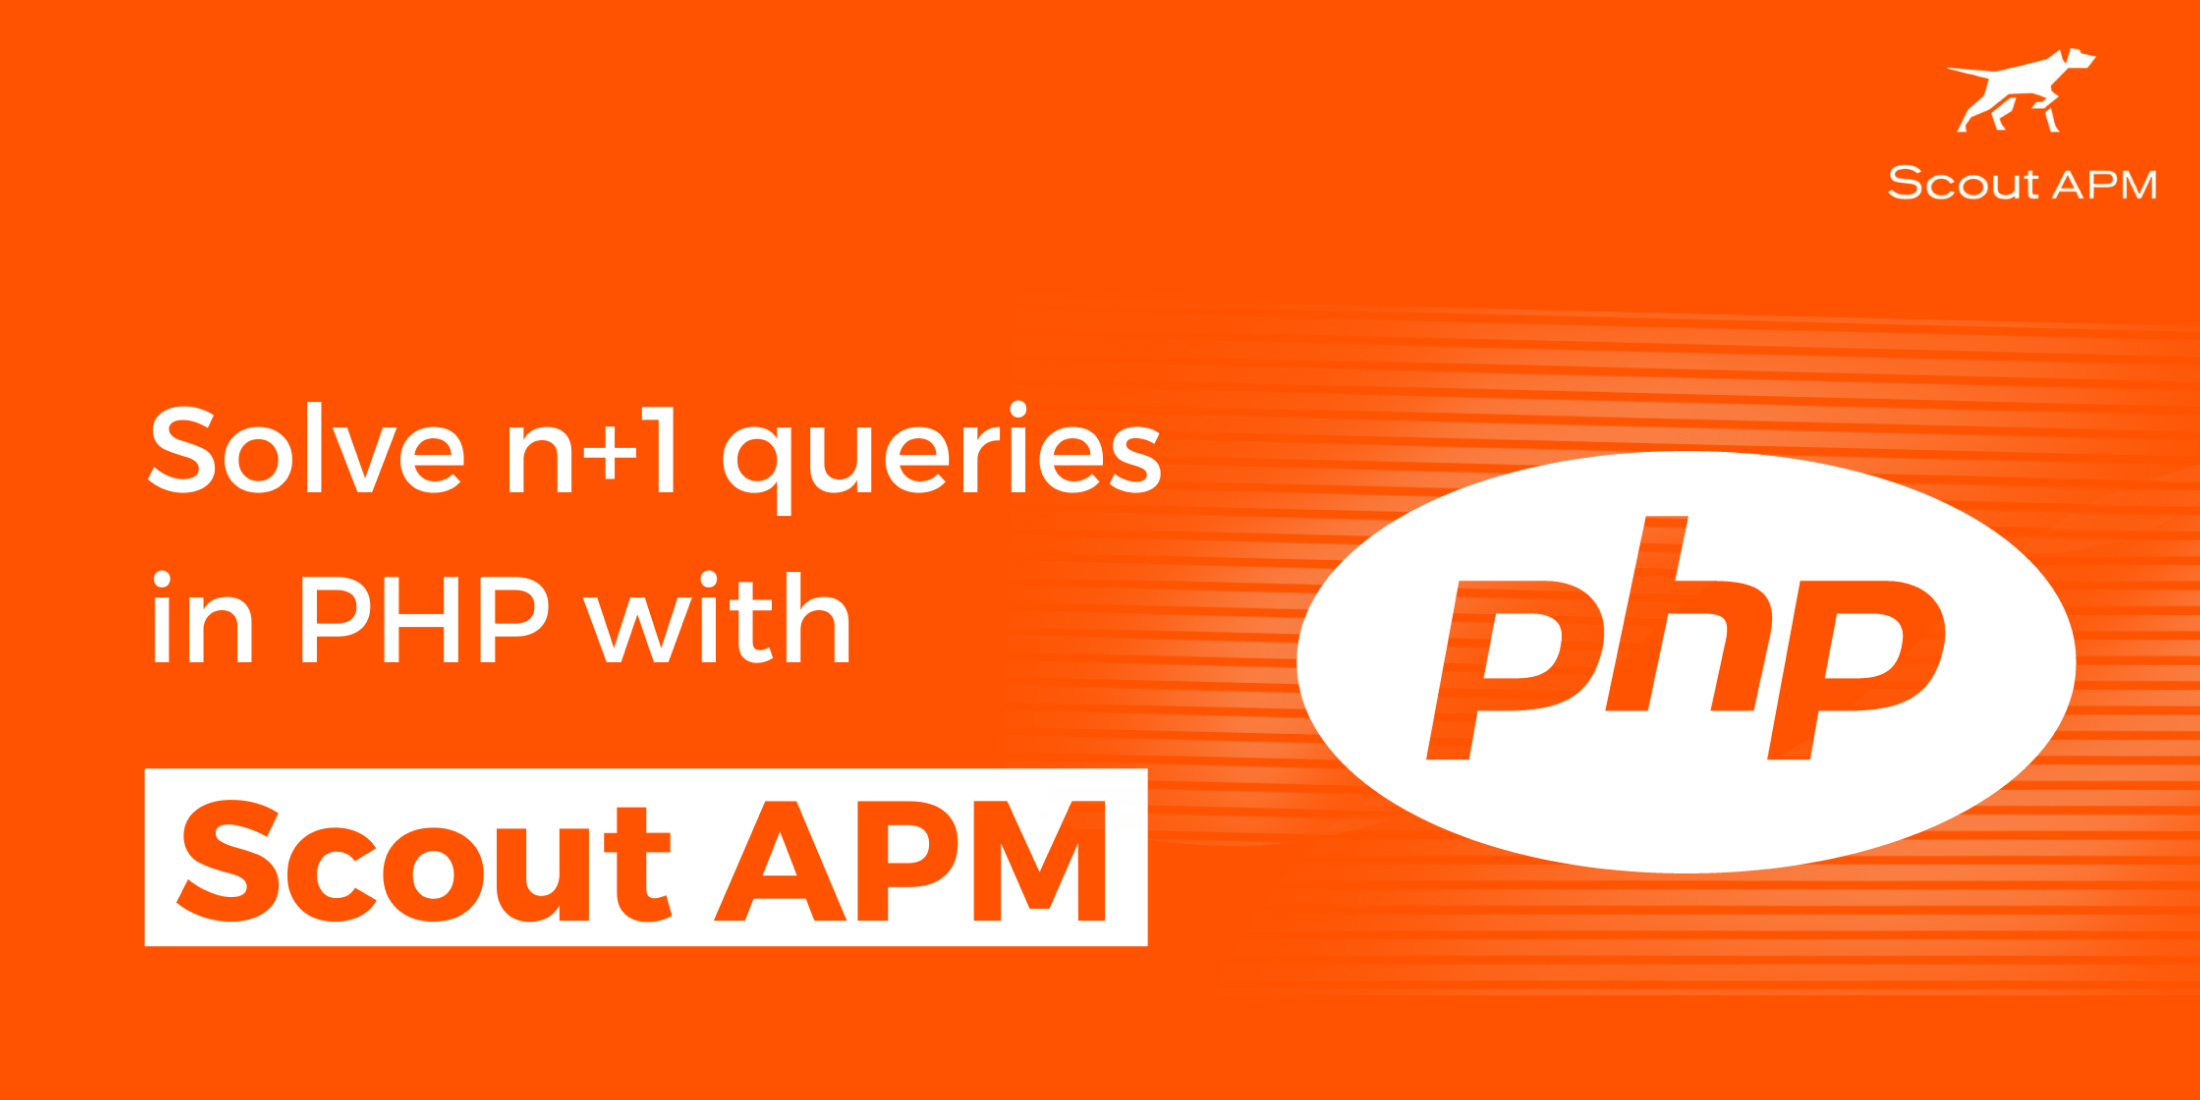 Solve n+1 queries in PHP with Scout APM image